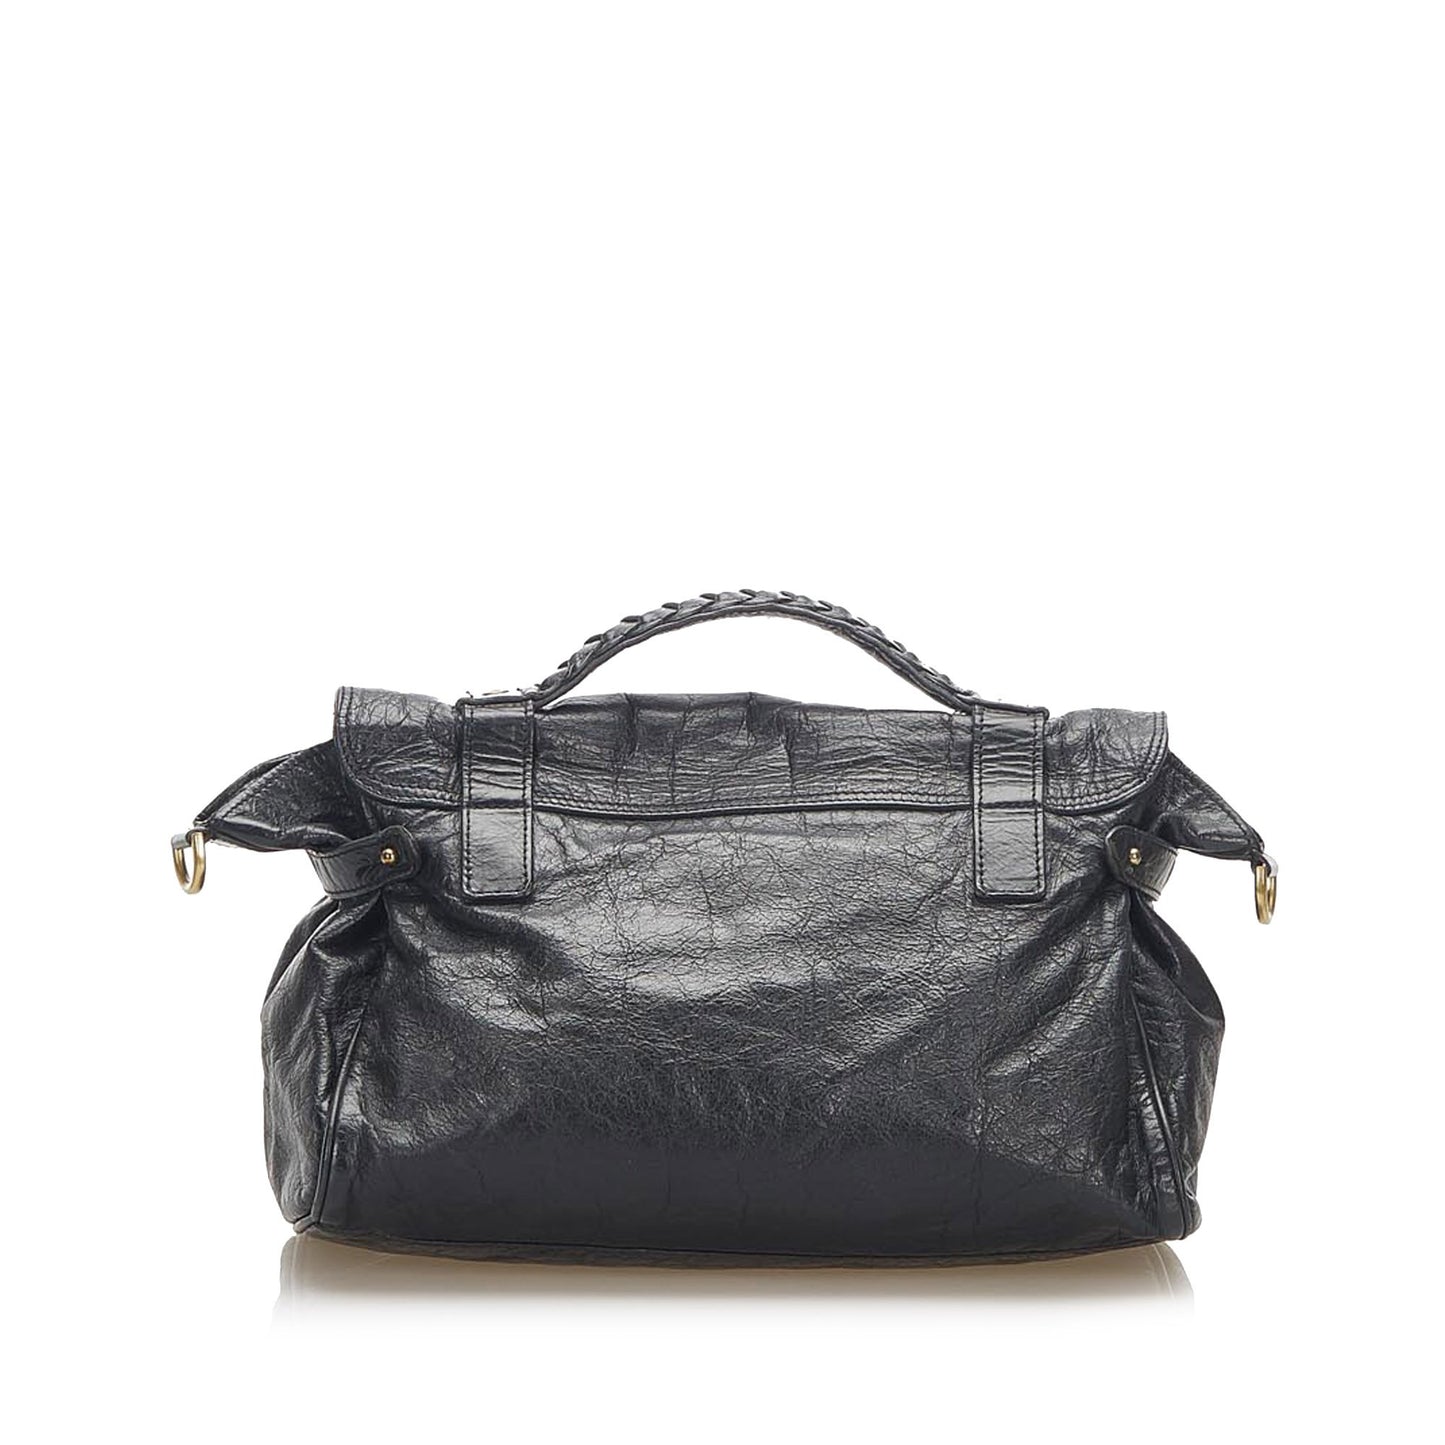 Mulberry Alexa Regular Black With Brass Hardware Bags Mulberry 